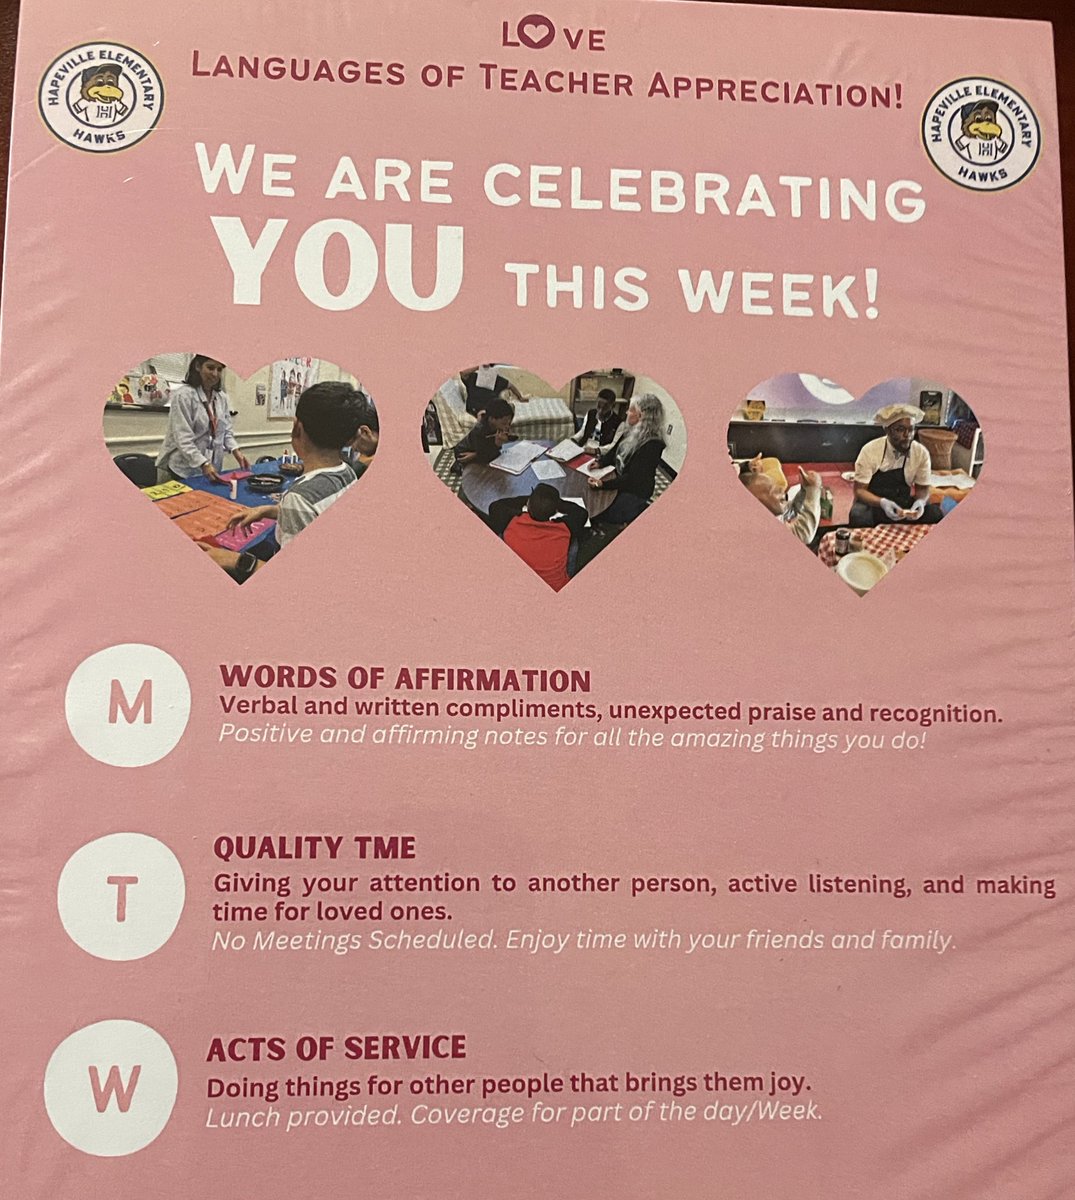 2nd Act of Service for #TeacherAppreciationWeek included each admin team and front office staff holding every recess duty for Ts to have that moment to take care of what they needed to and/ or self-care. @DrTamaraCandis @kellymastro @KGregory79 #WhereTheMagicHappens